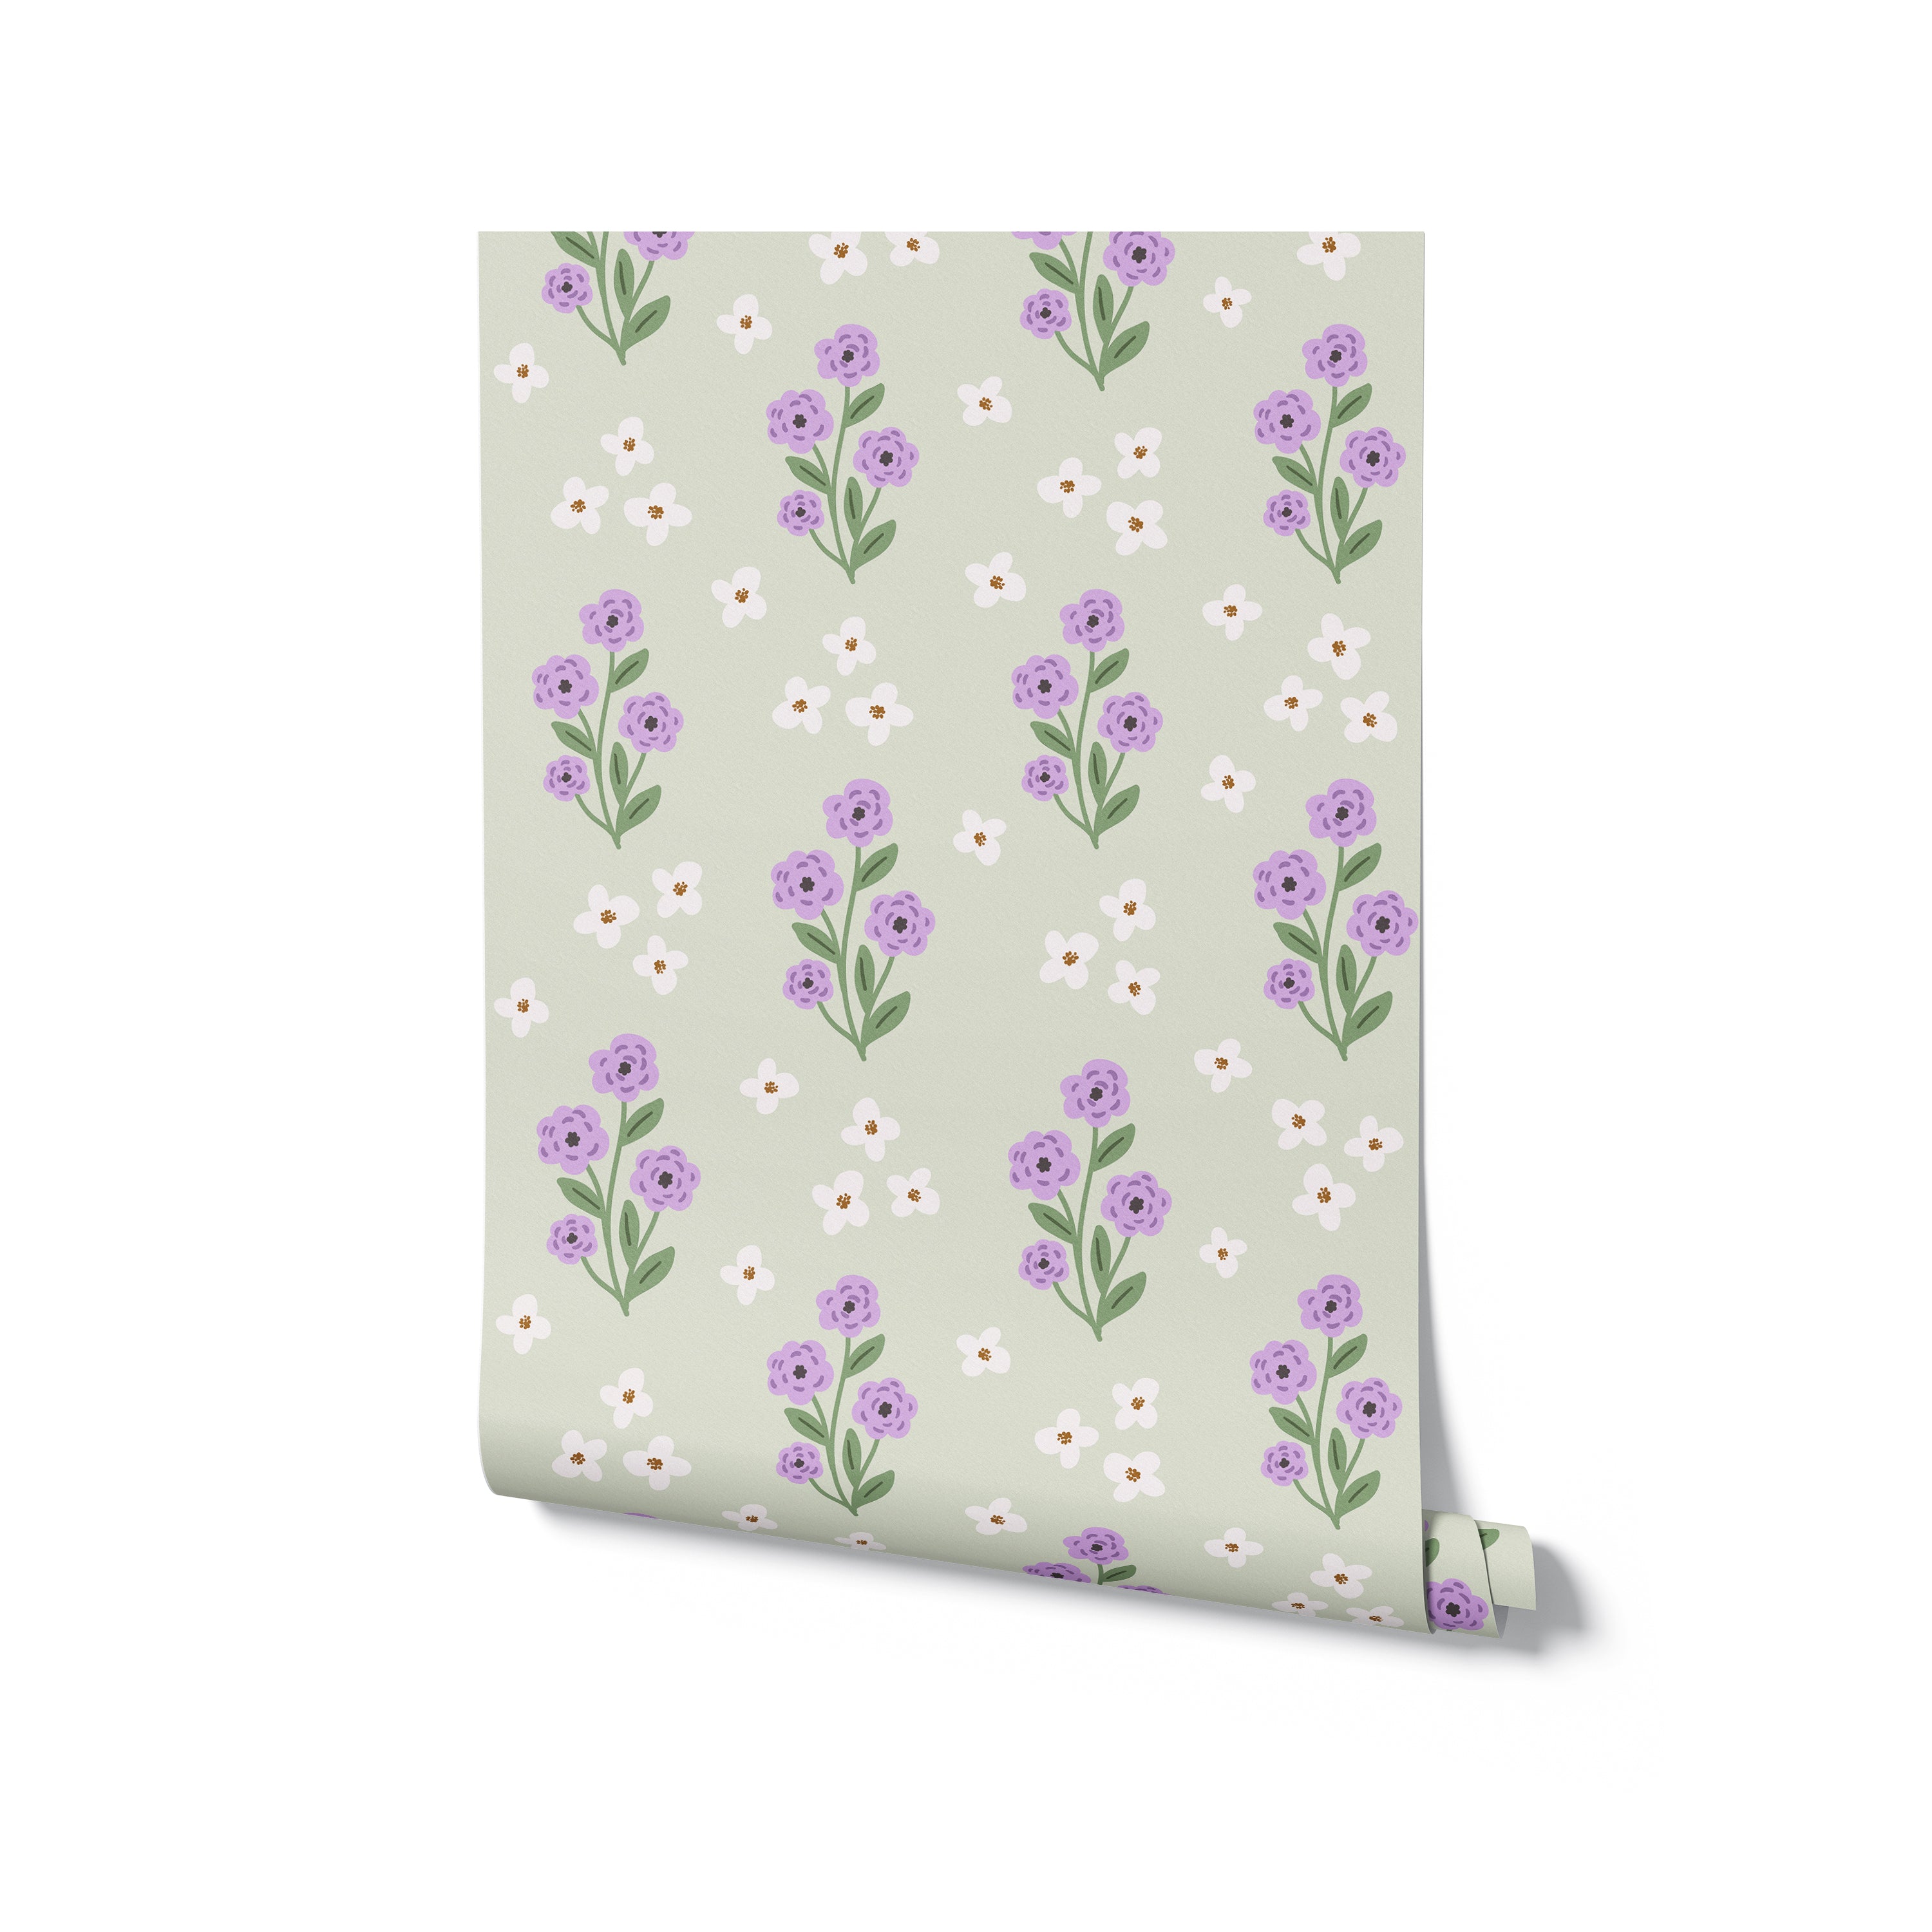 The Peaceful Floral Bouquet Wallpaper presented in a roll, displaying the repeating pattern of tranquil purple and white flowers set against a gentle green background, ready to bring a harmonious atmosphere to any room.